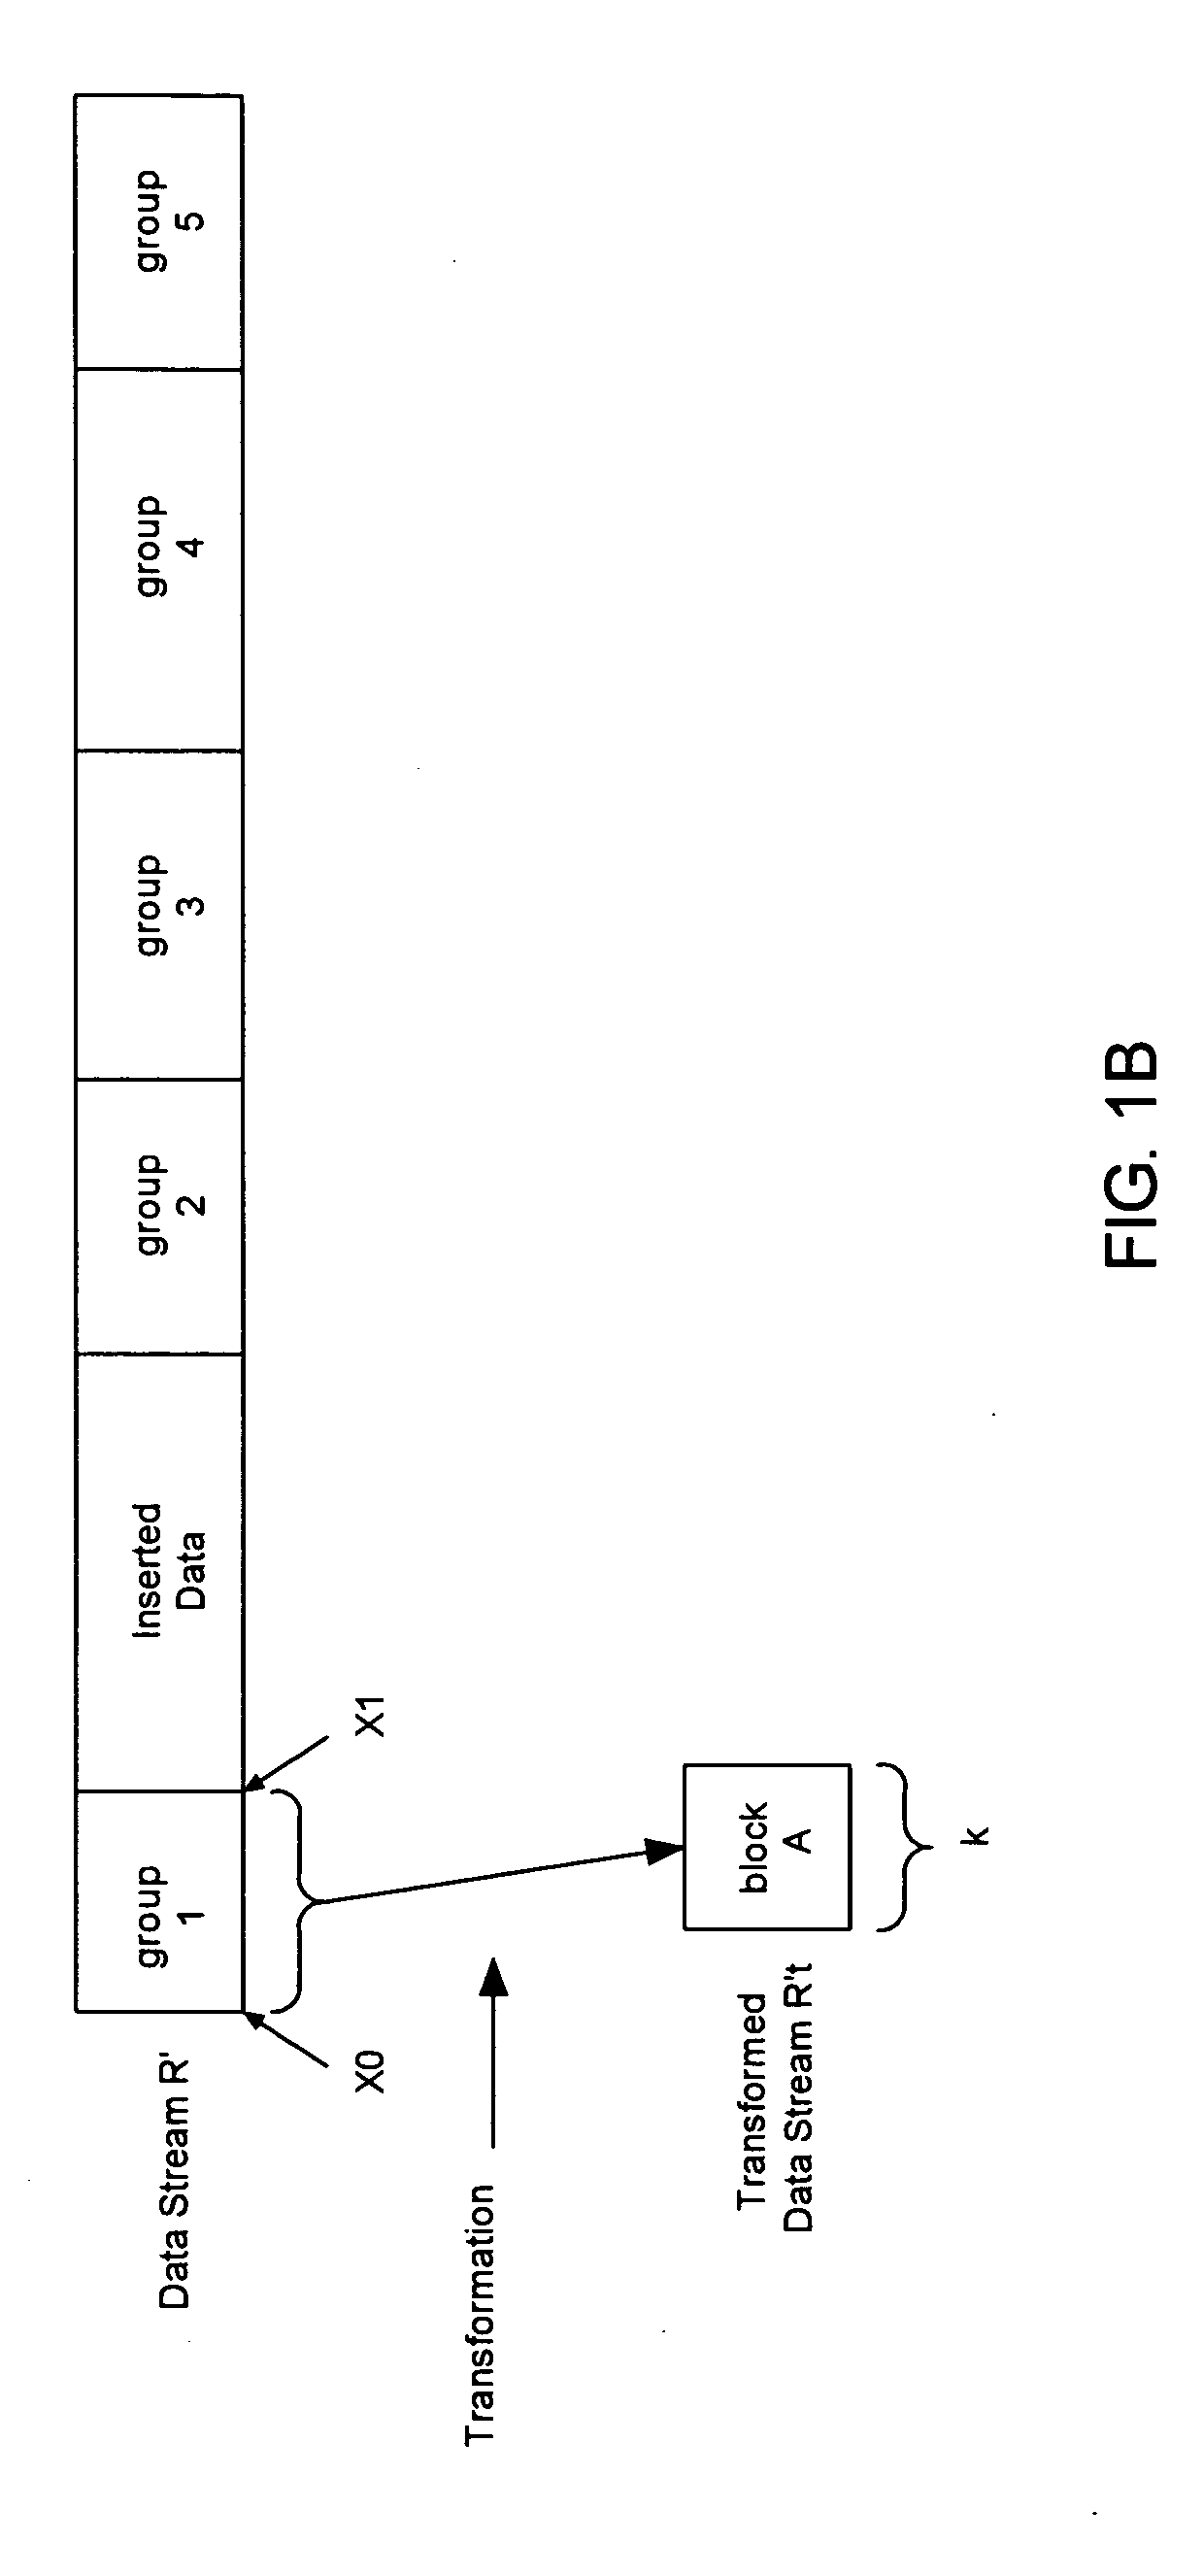 System and method for performing compression/encryption on data such that the number of duplicate blocks in the transformed data is increased